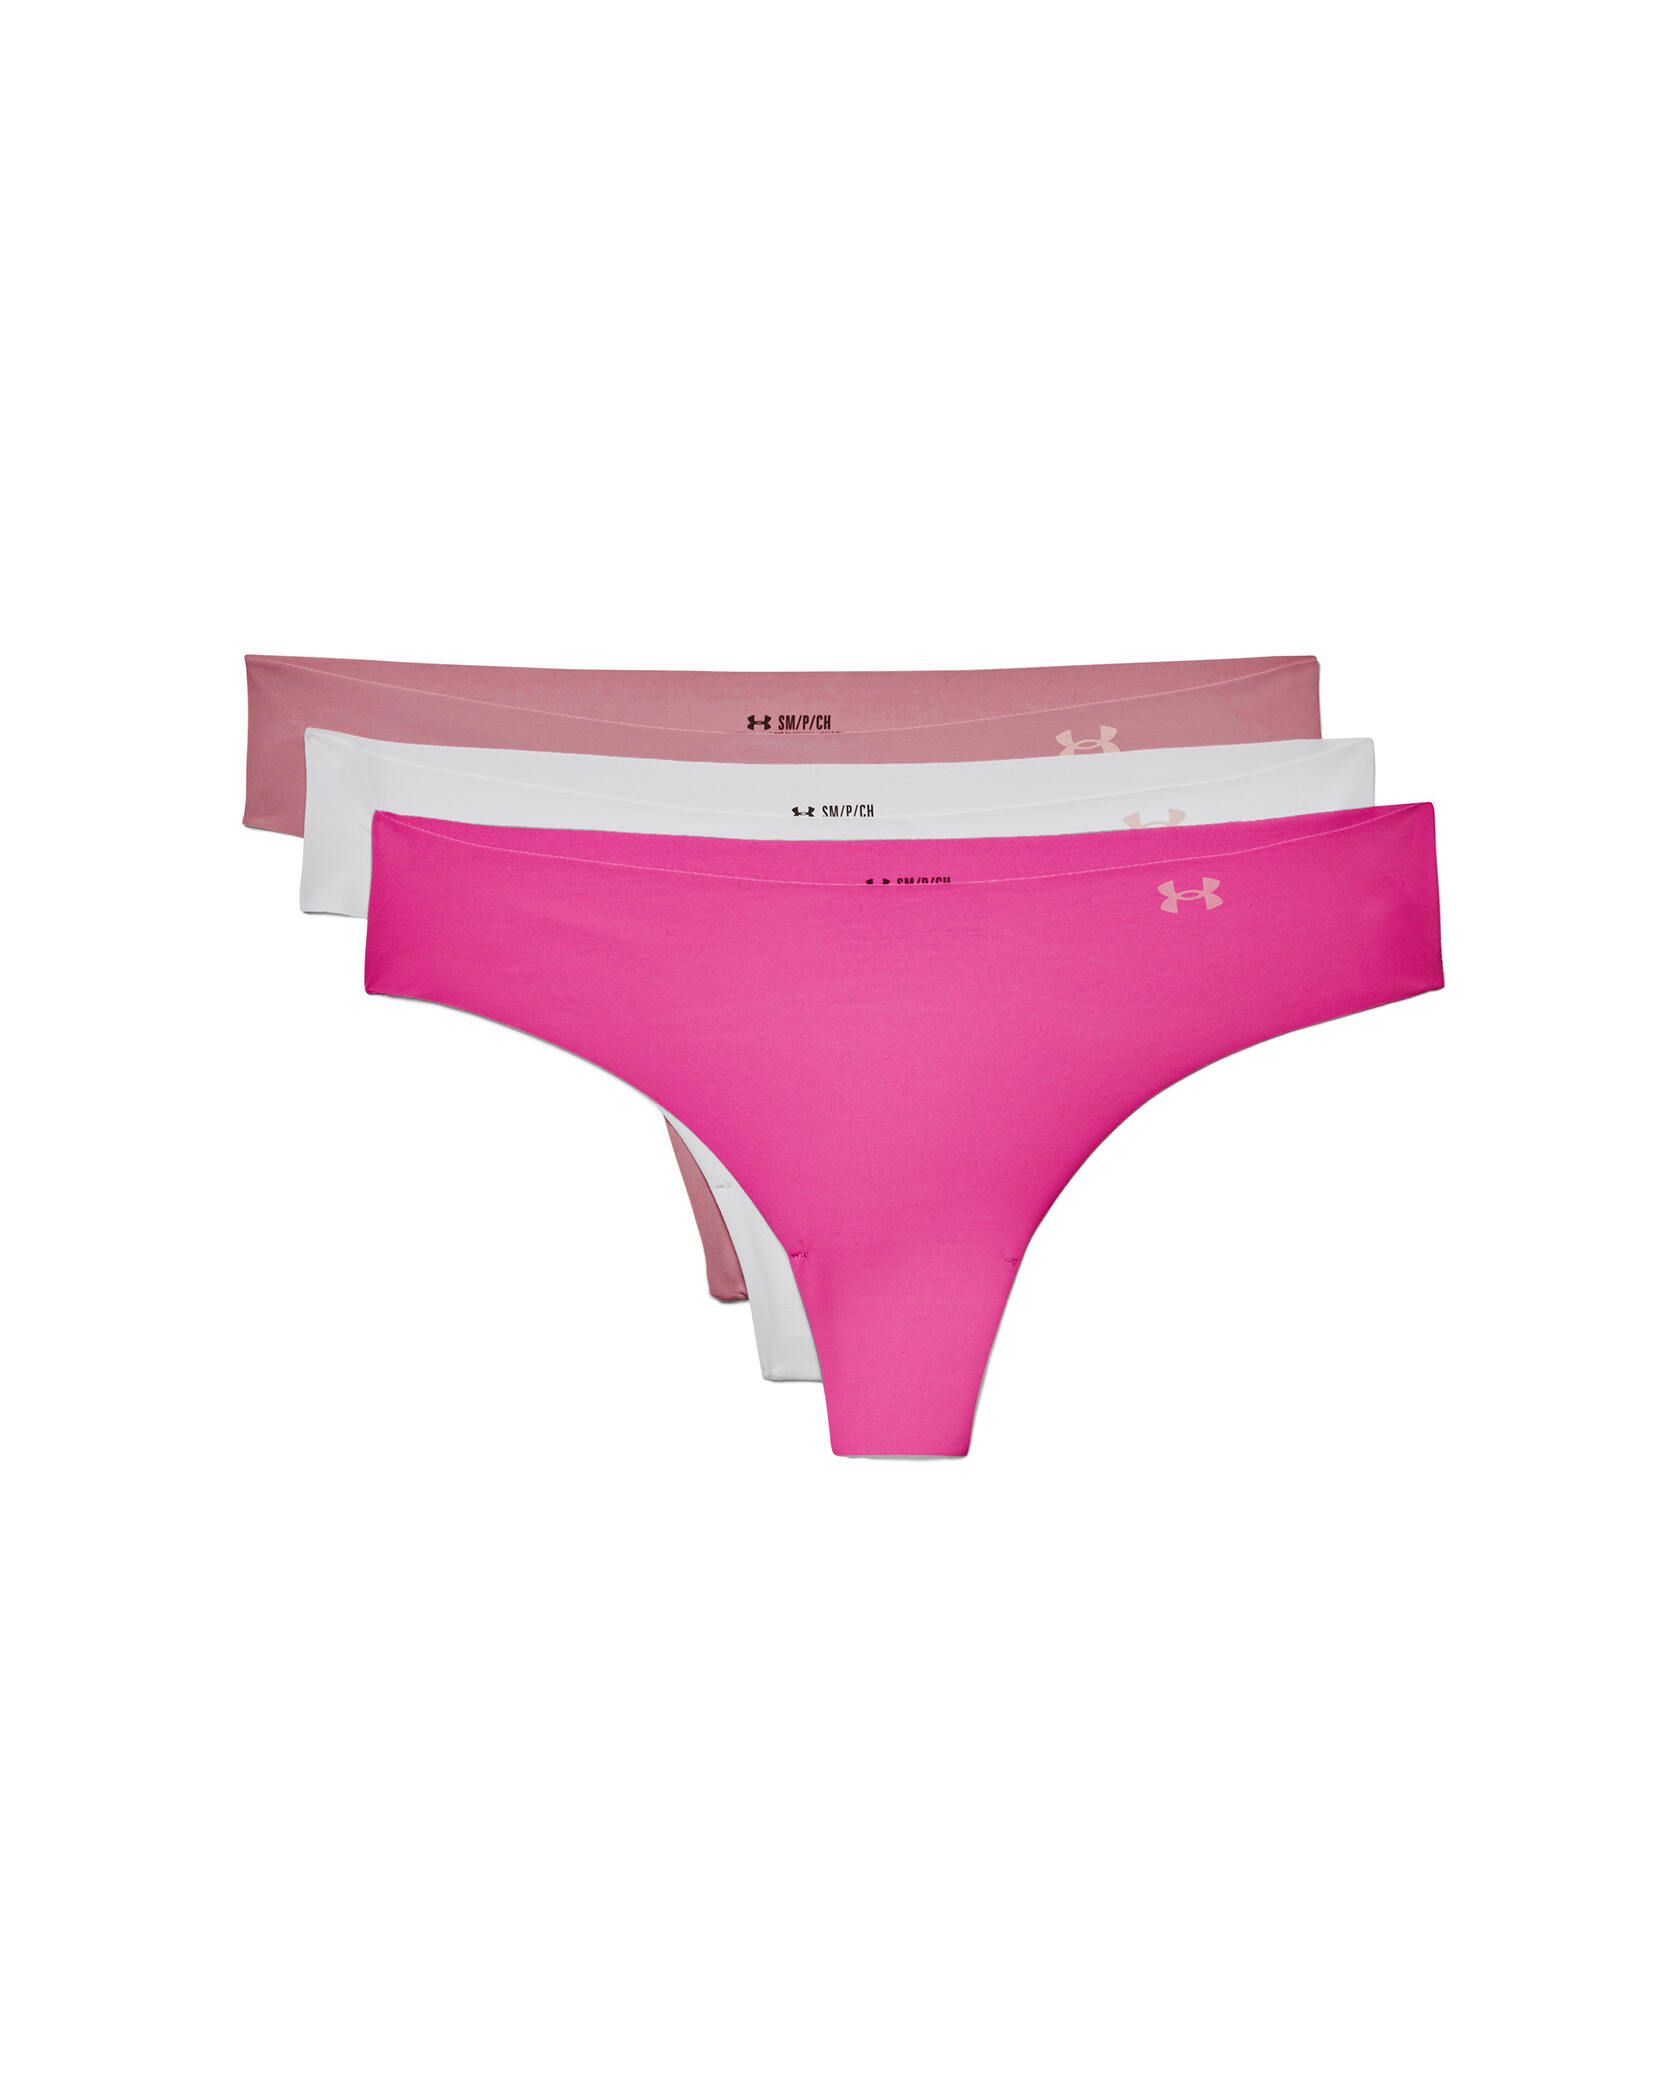 Pk of 7) Comfy thong Panties Online India, Snazzyway